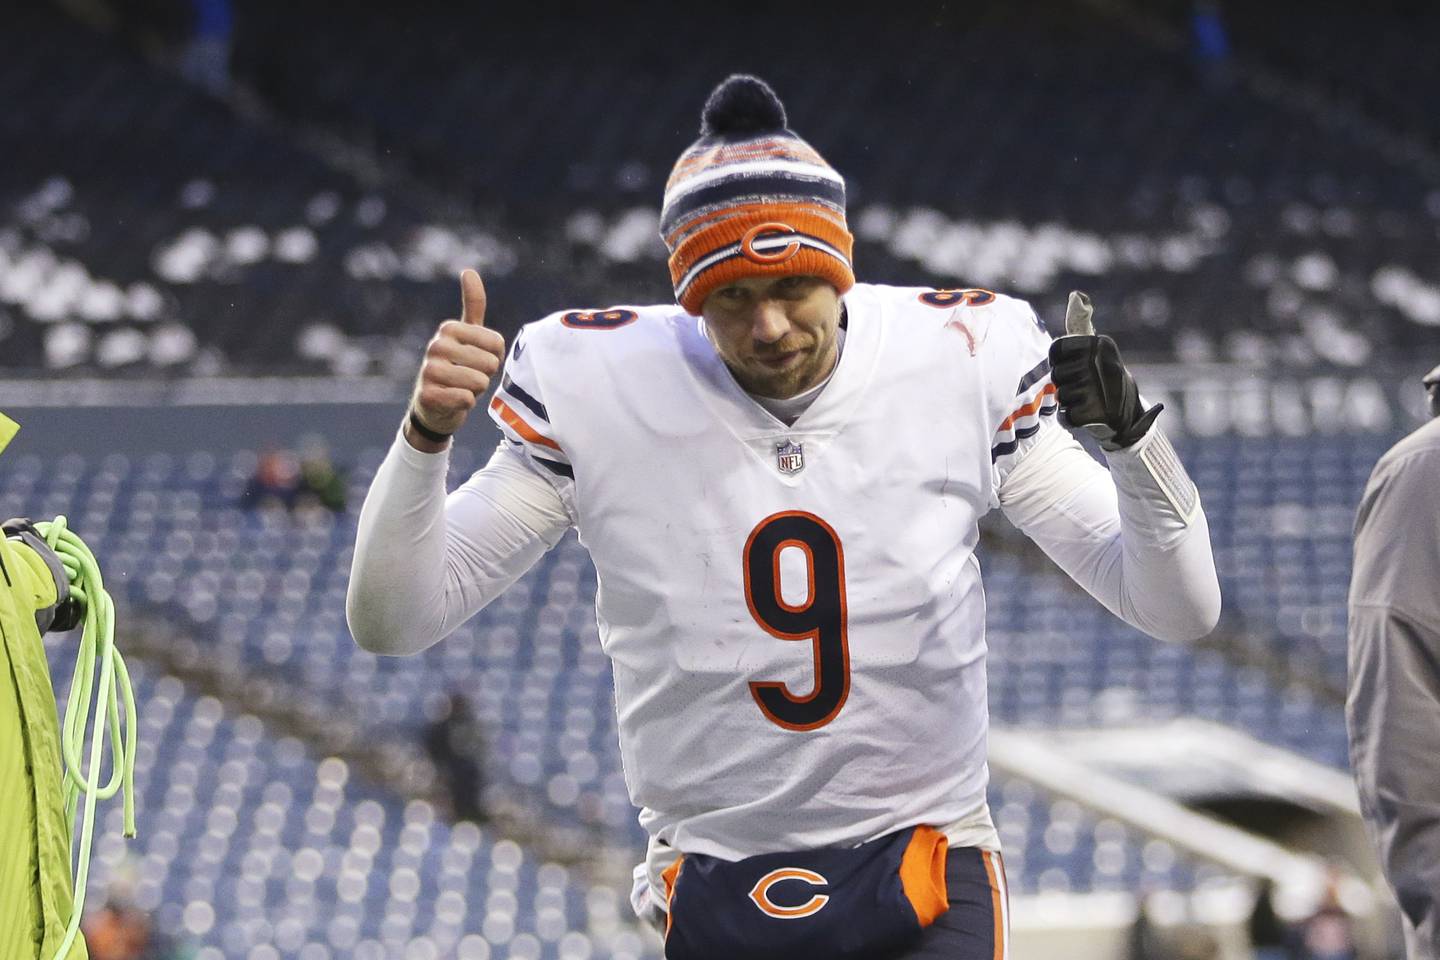 Chicago Bears quarterback Nick Foles gives a thumbs-up as he heads off the field after the team beat the Seattle Seahawks on Sunday, Dec. 26, 2021, in Seattle.